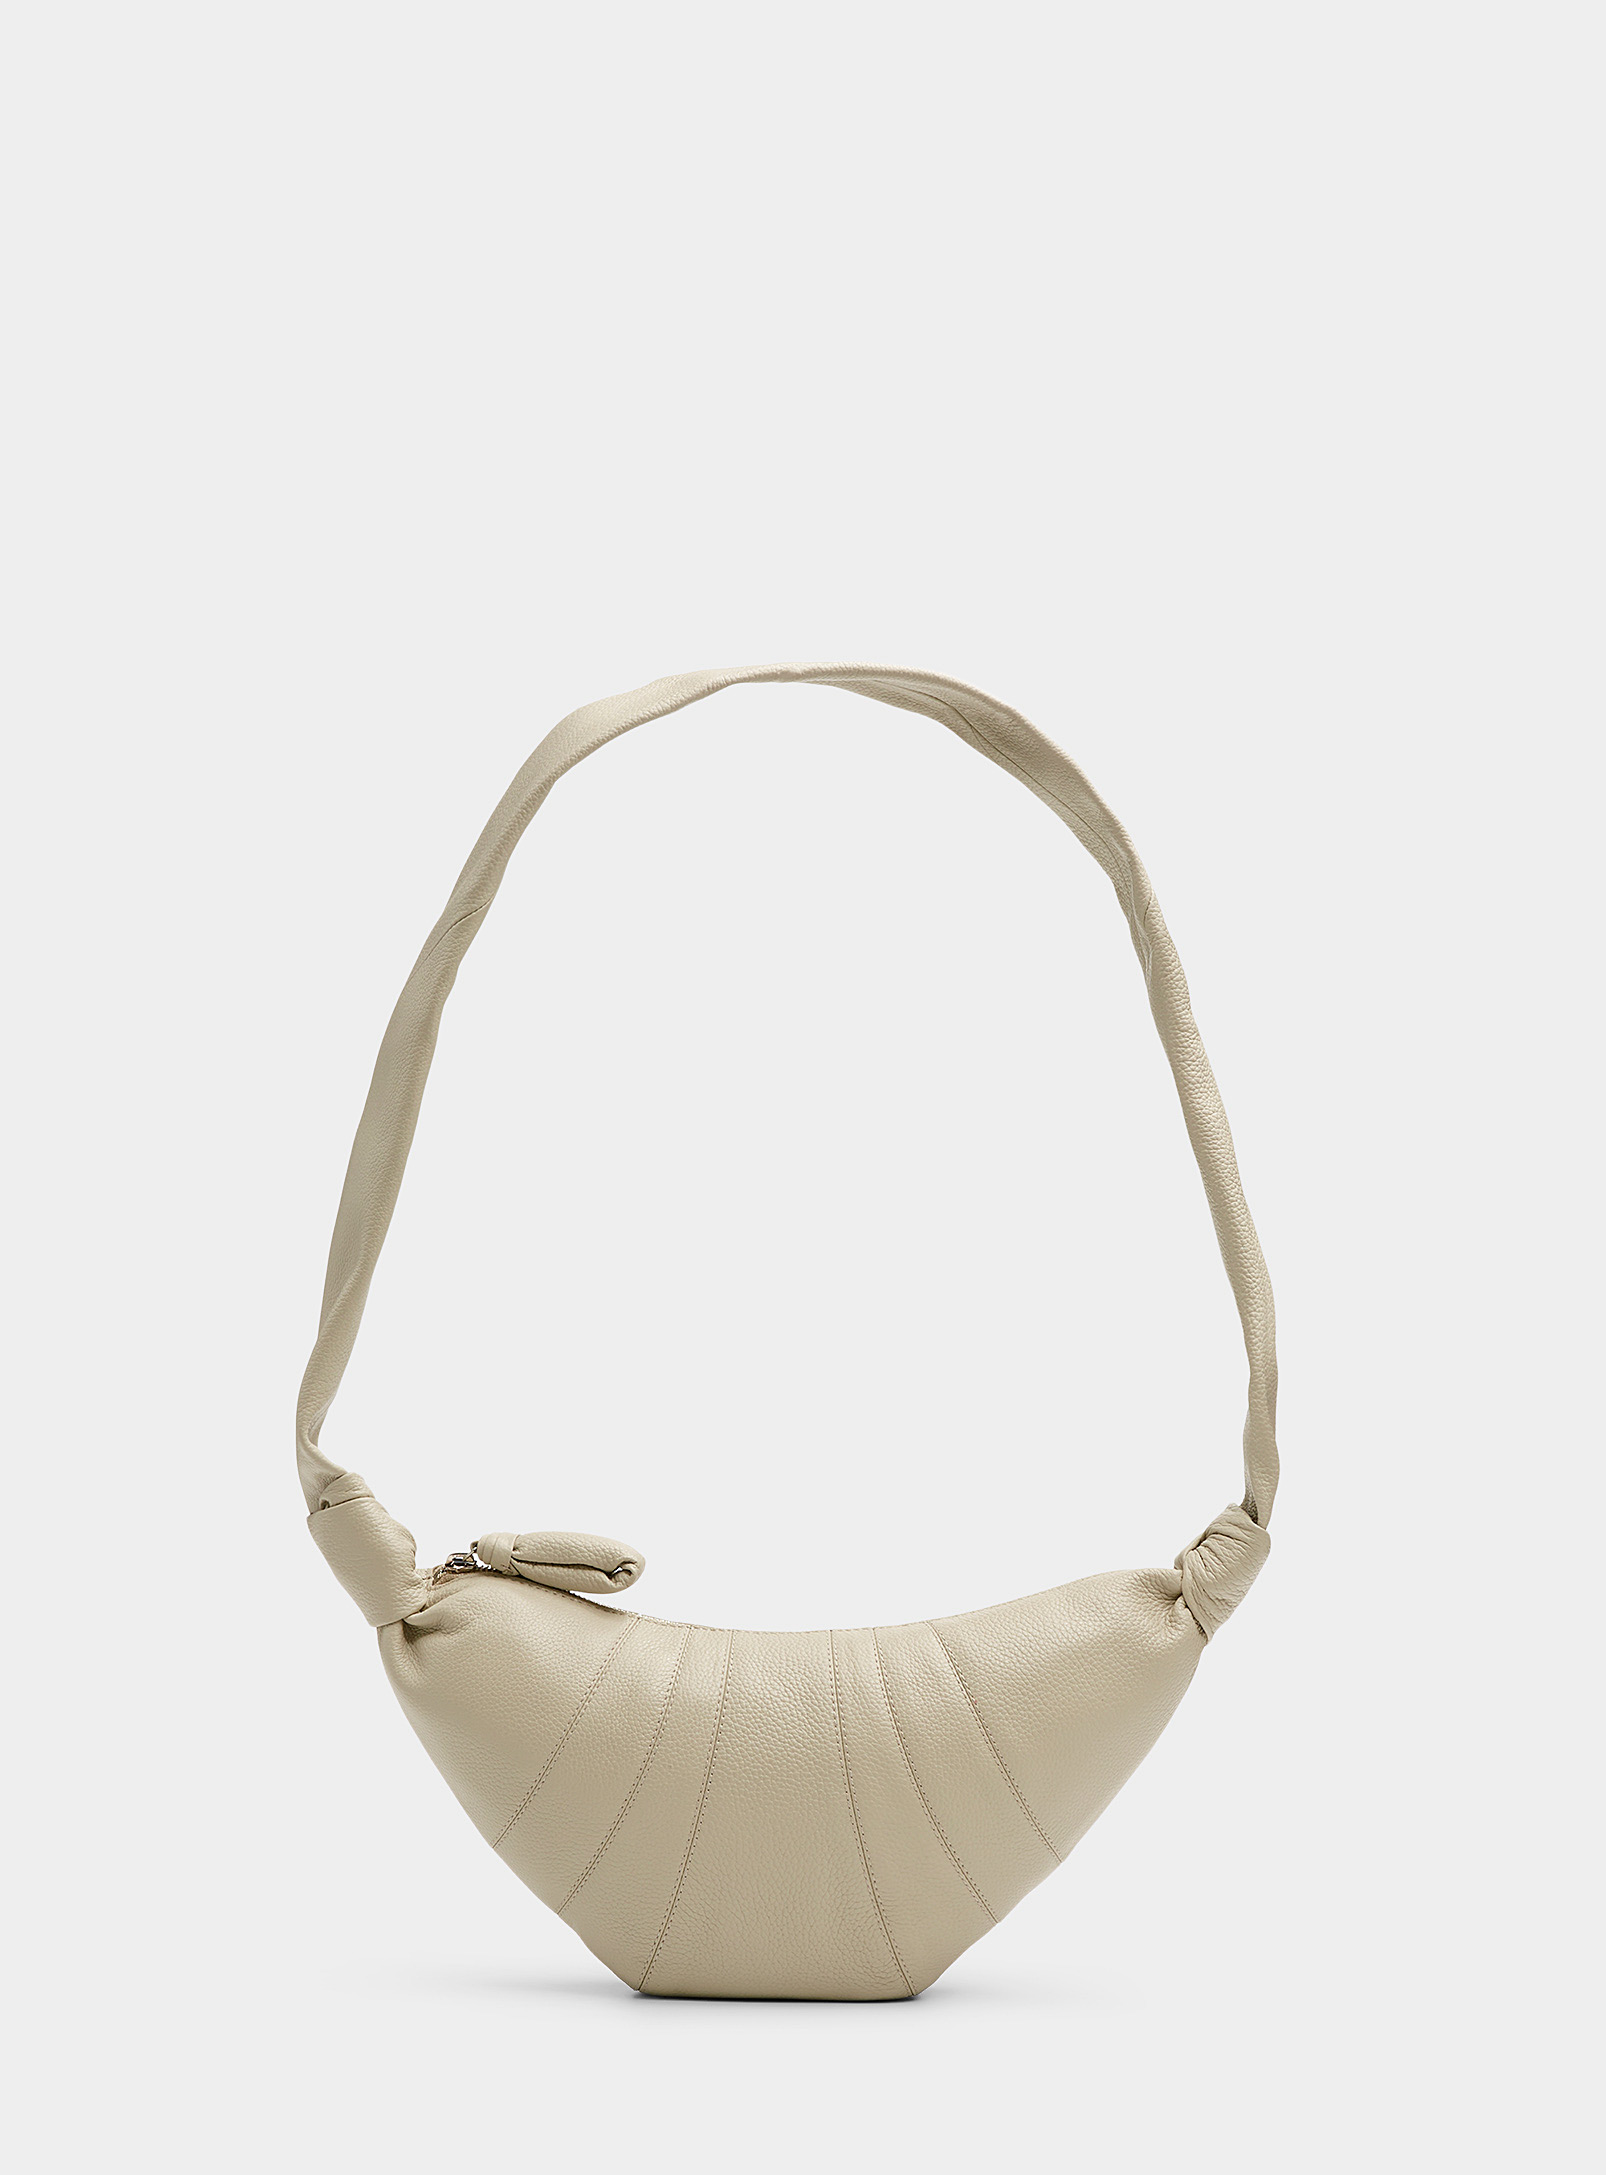 Lemaire Croissant Small Grained Leather Bag In Cream Beige